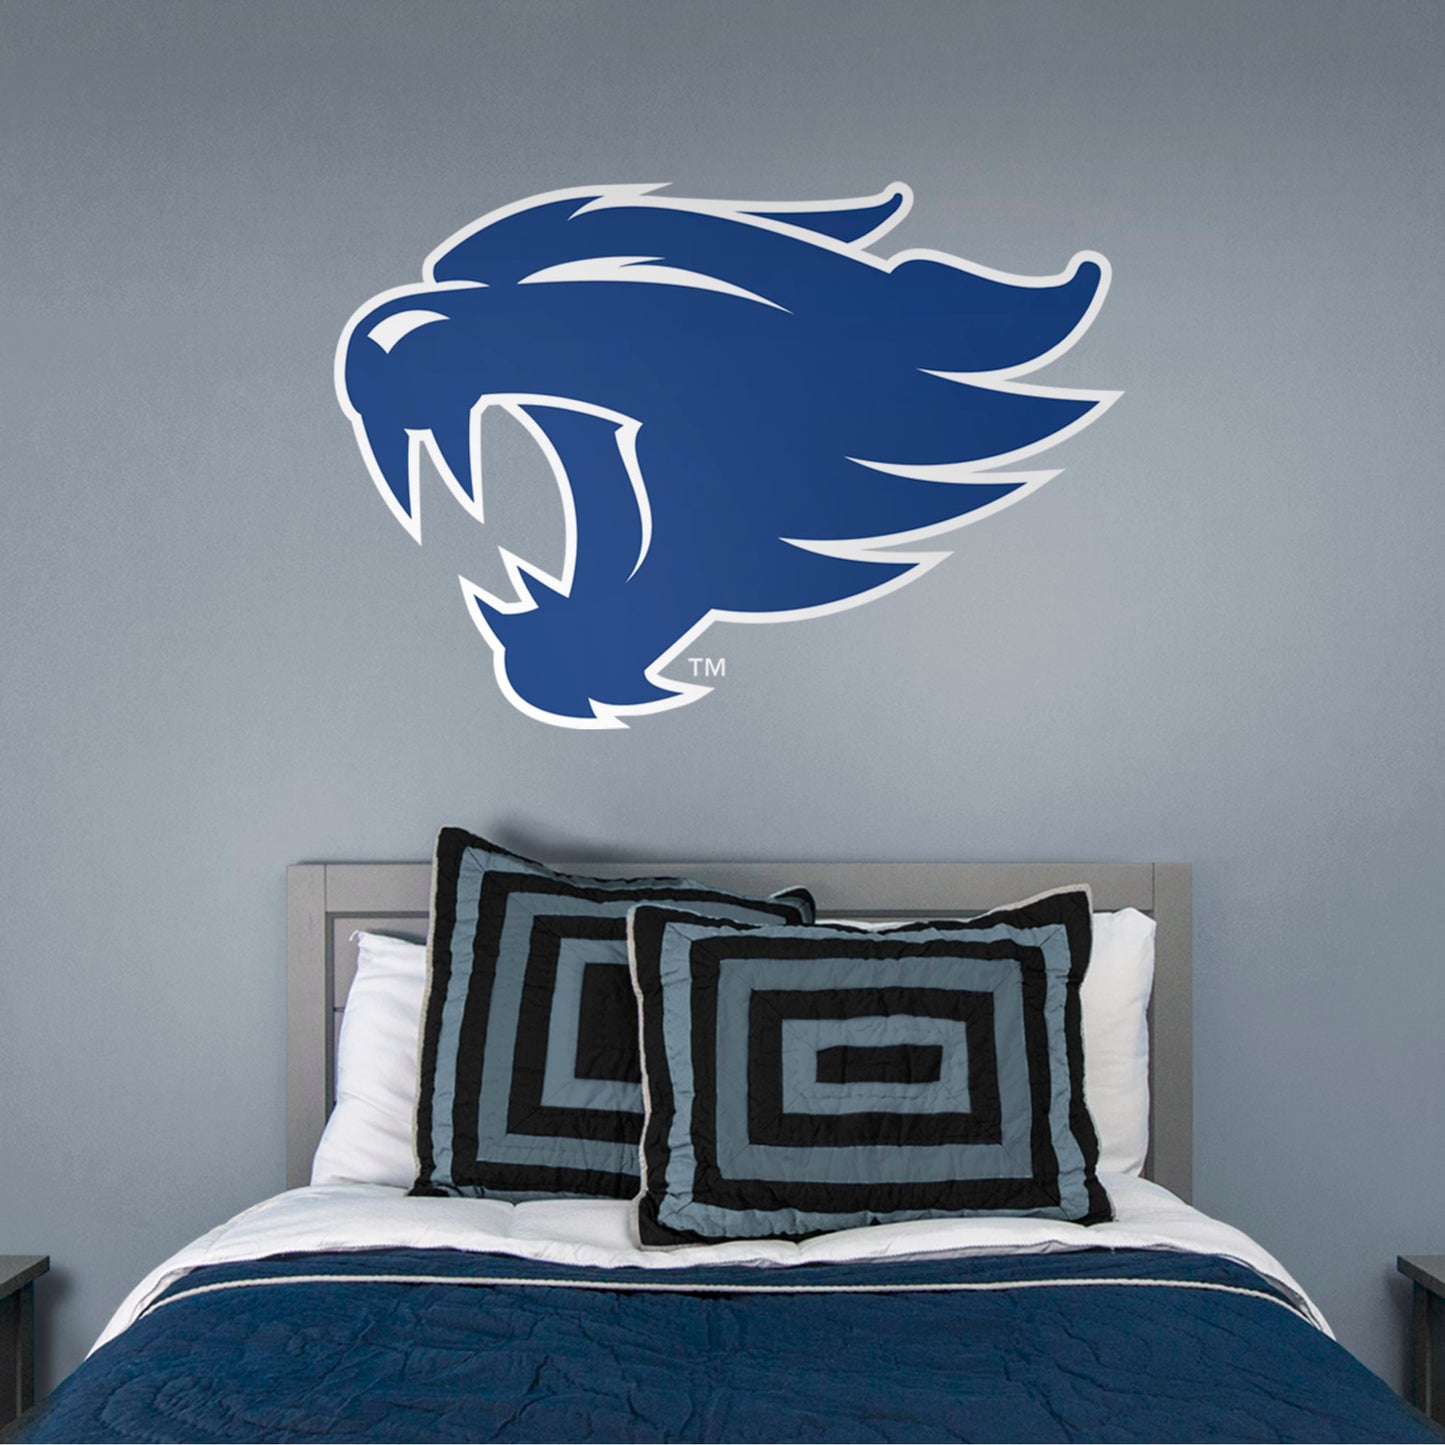 Kentucky Wildcats: Alternate Logo - Officially Licensed Removable Wall Decal